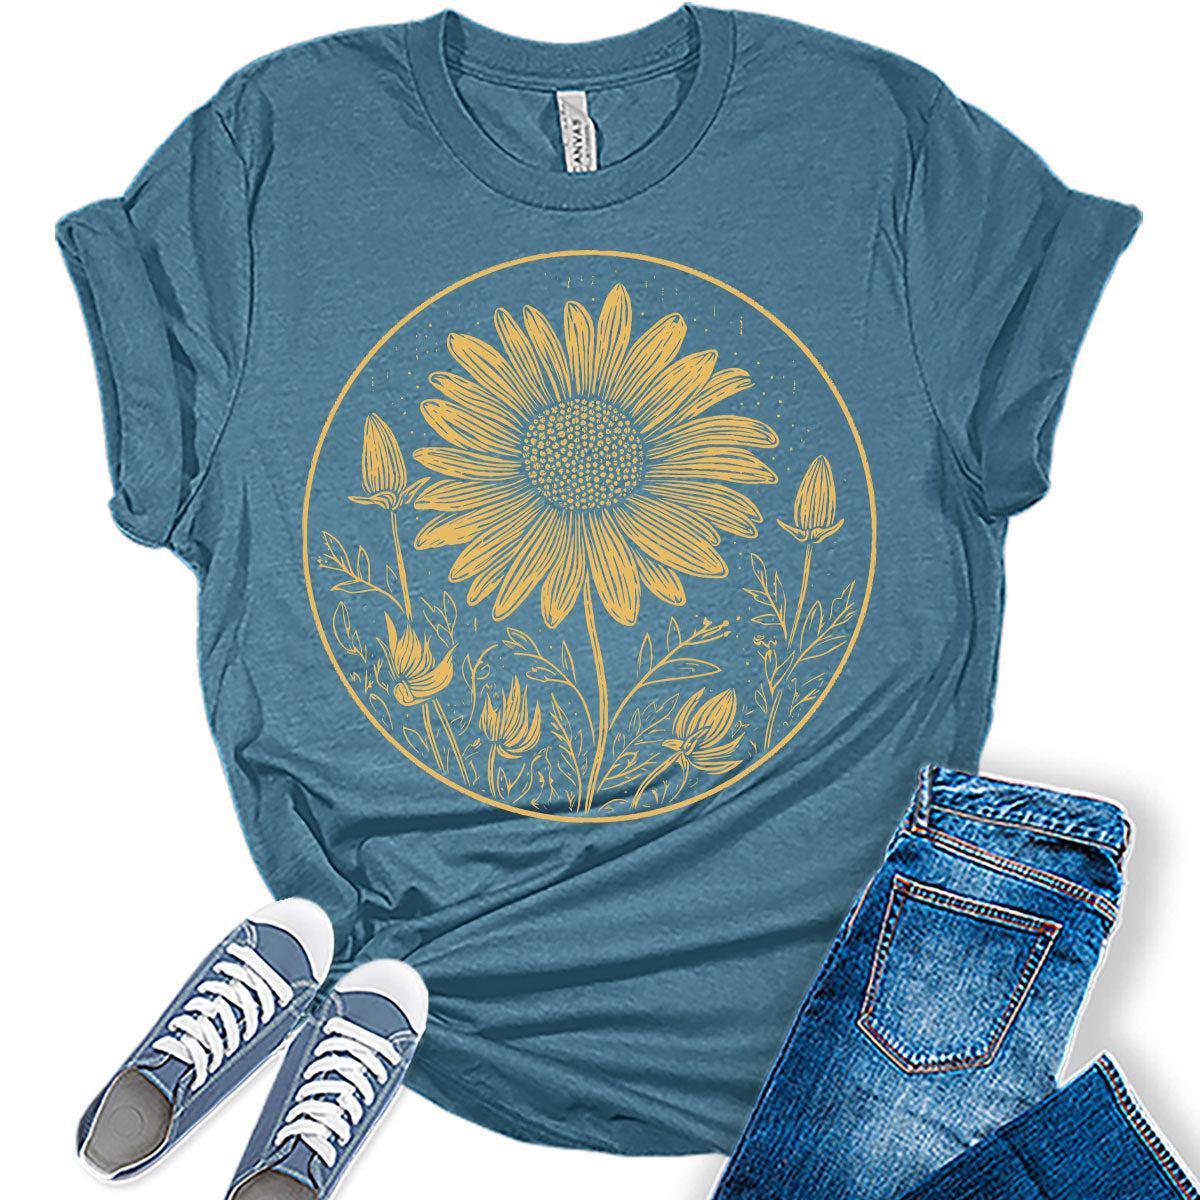 Sunflower Shirt Vintage Fall Graphic Tees for Women